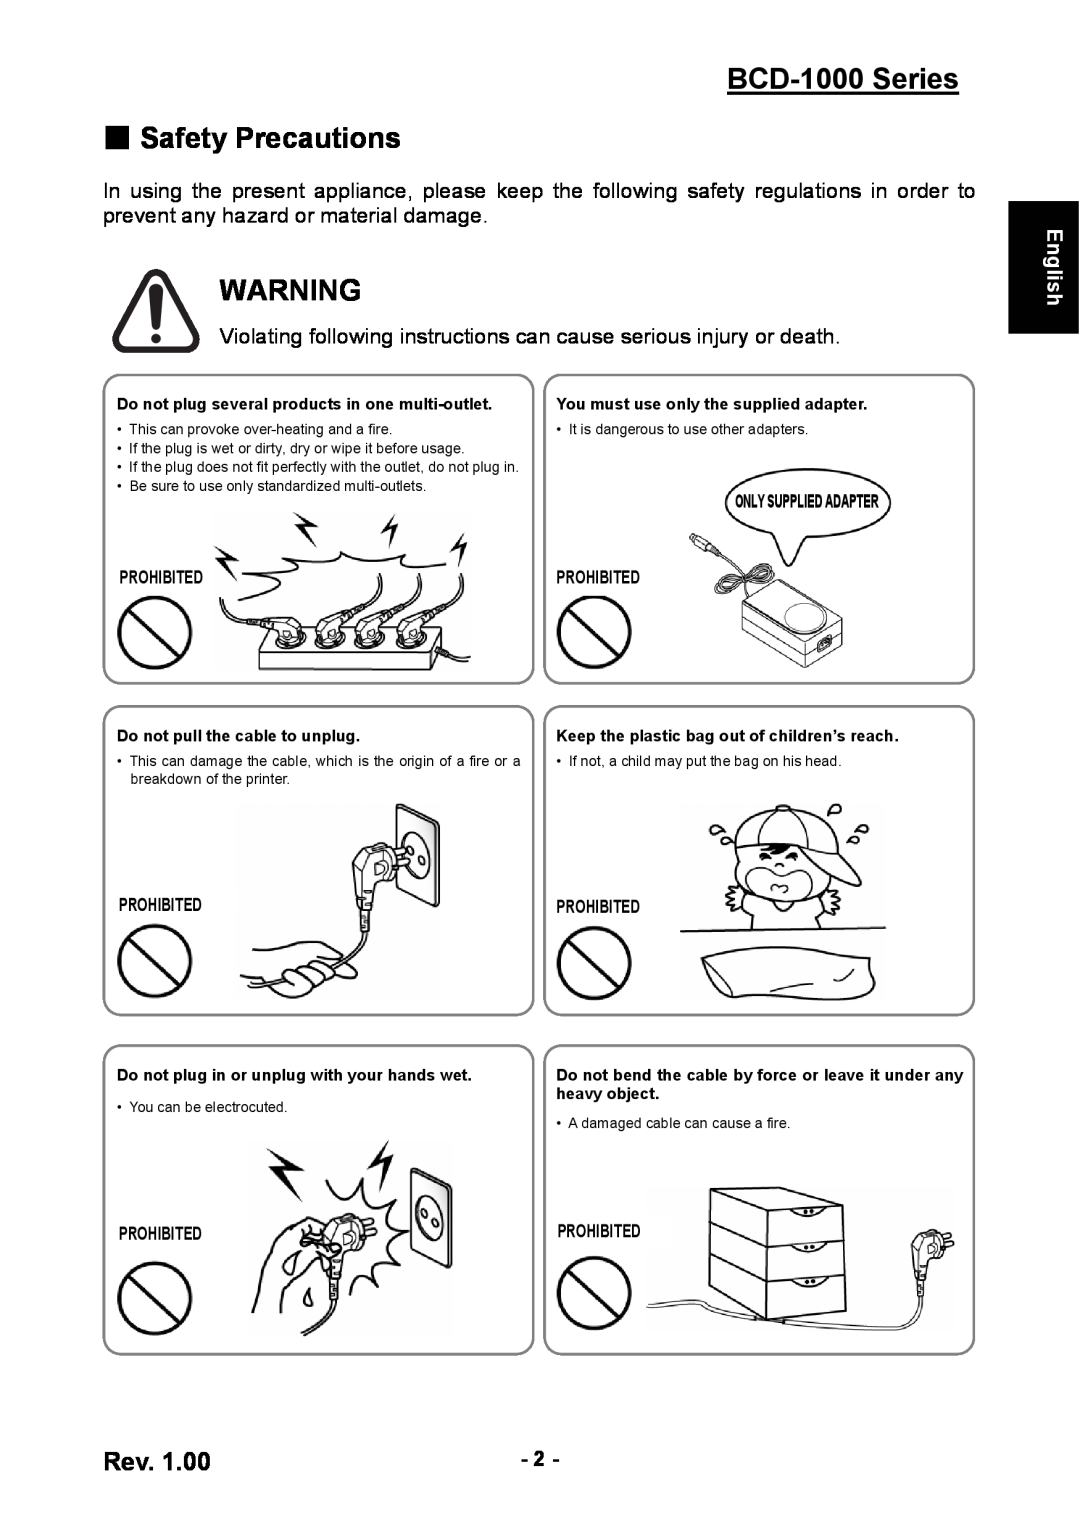 Samsung user manual BCD-1000 Series Safety Precautions, English, Prohibited 